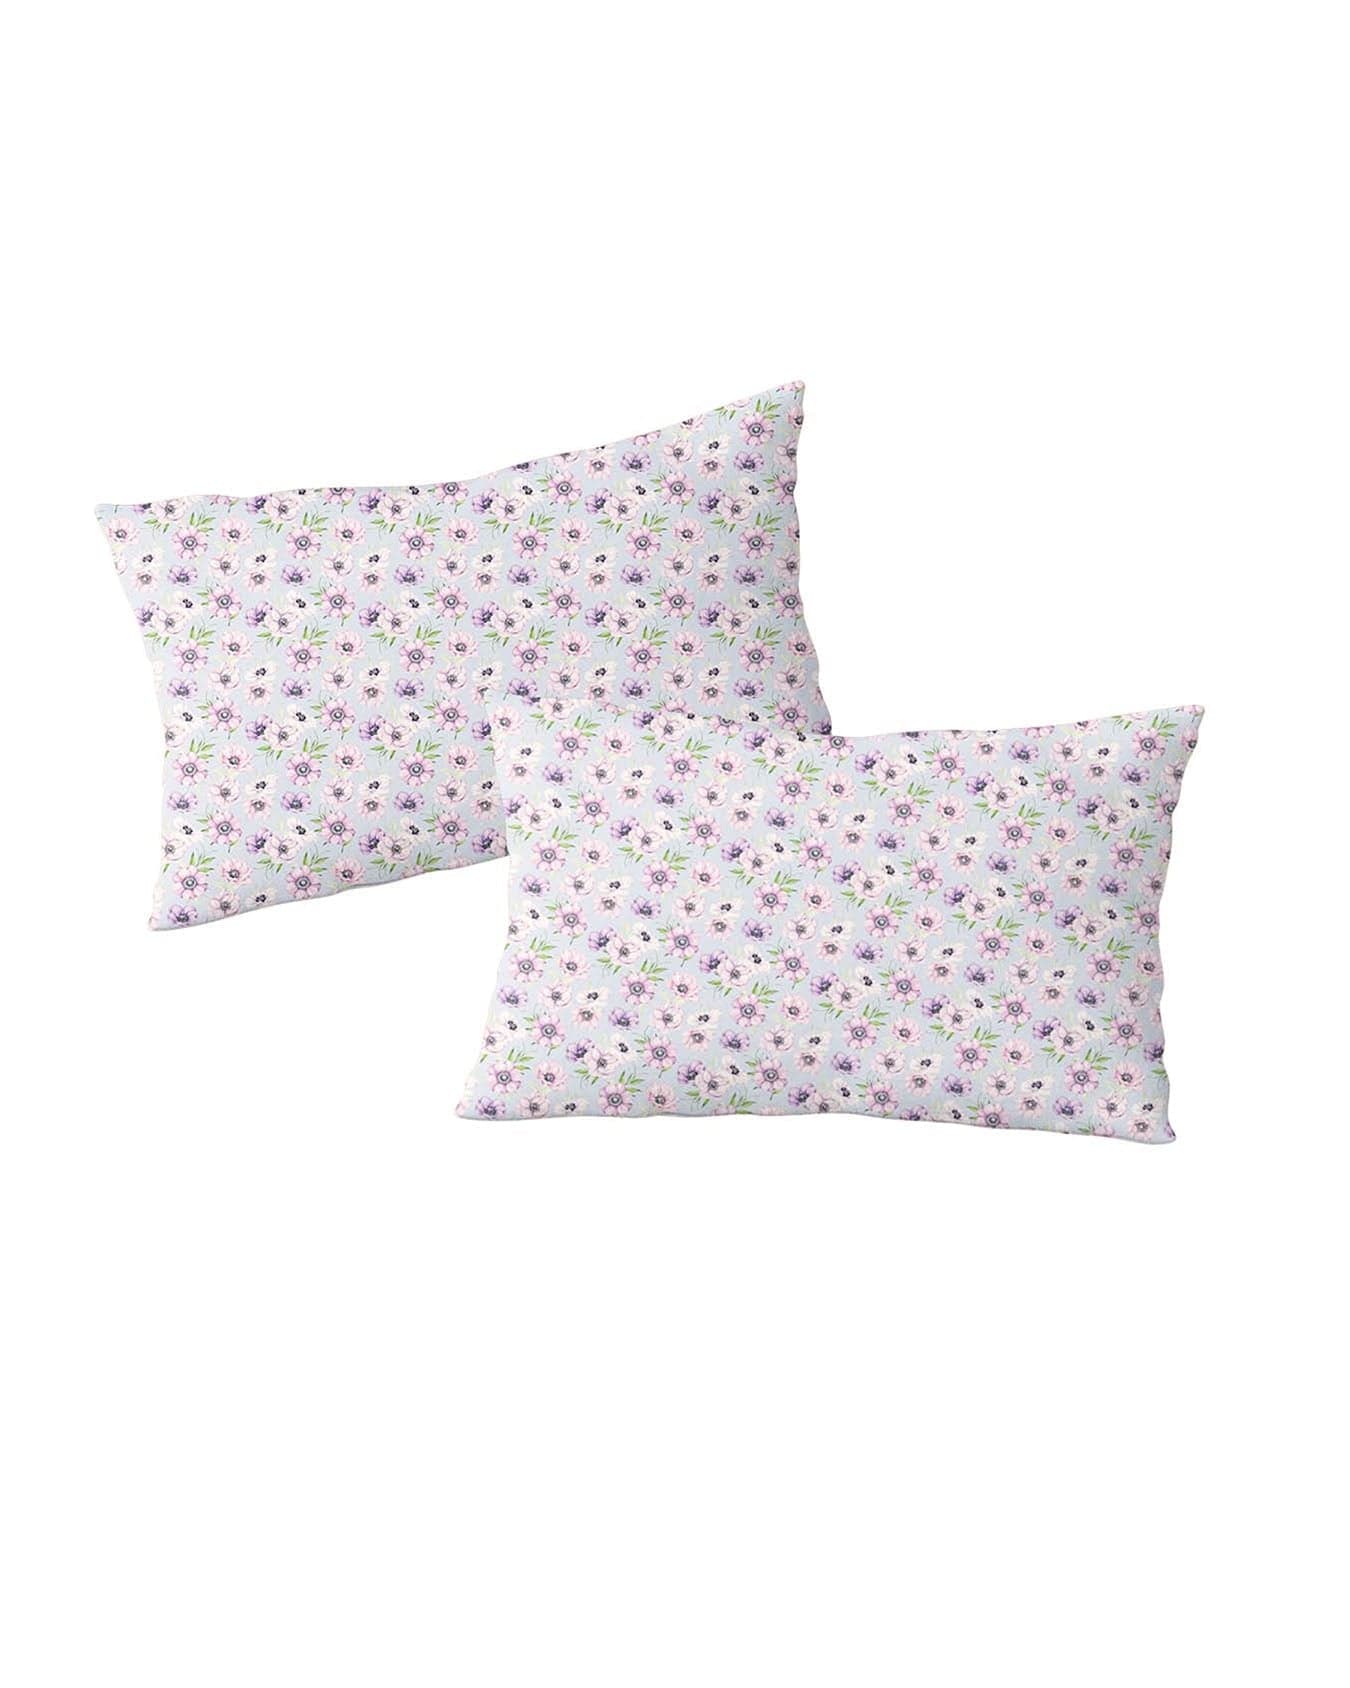 Floral Bamboo Pillowcases: Set of 2